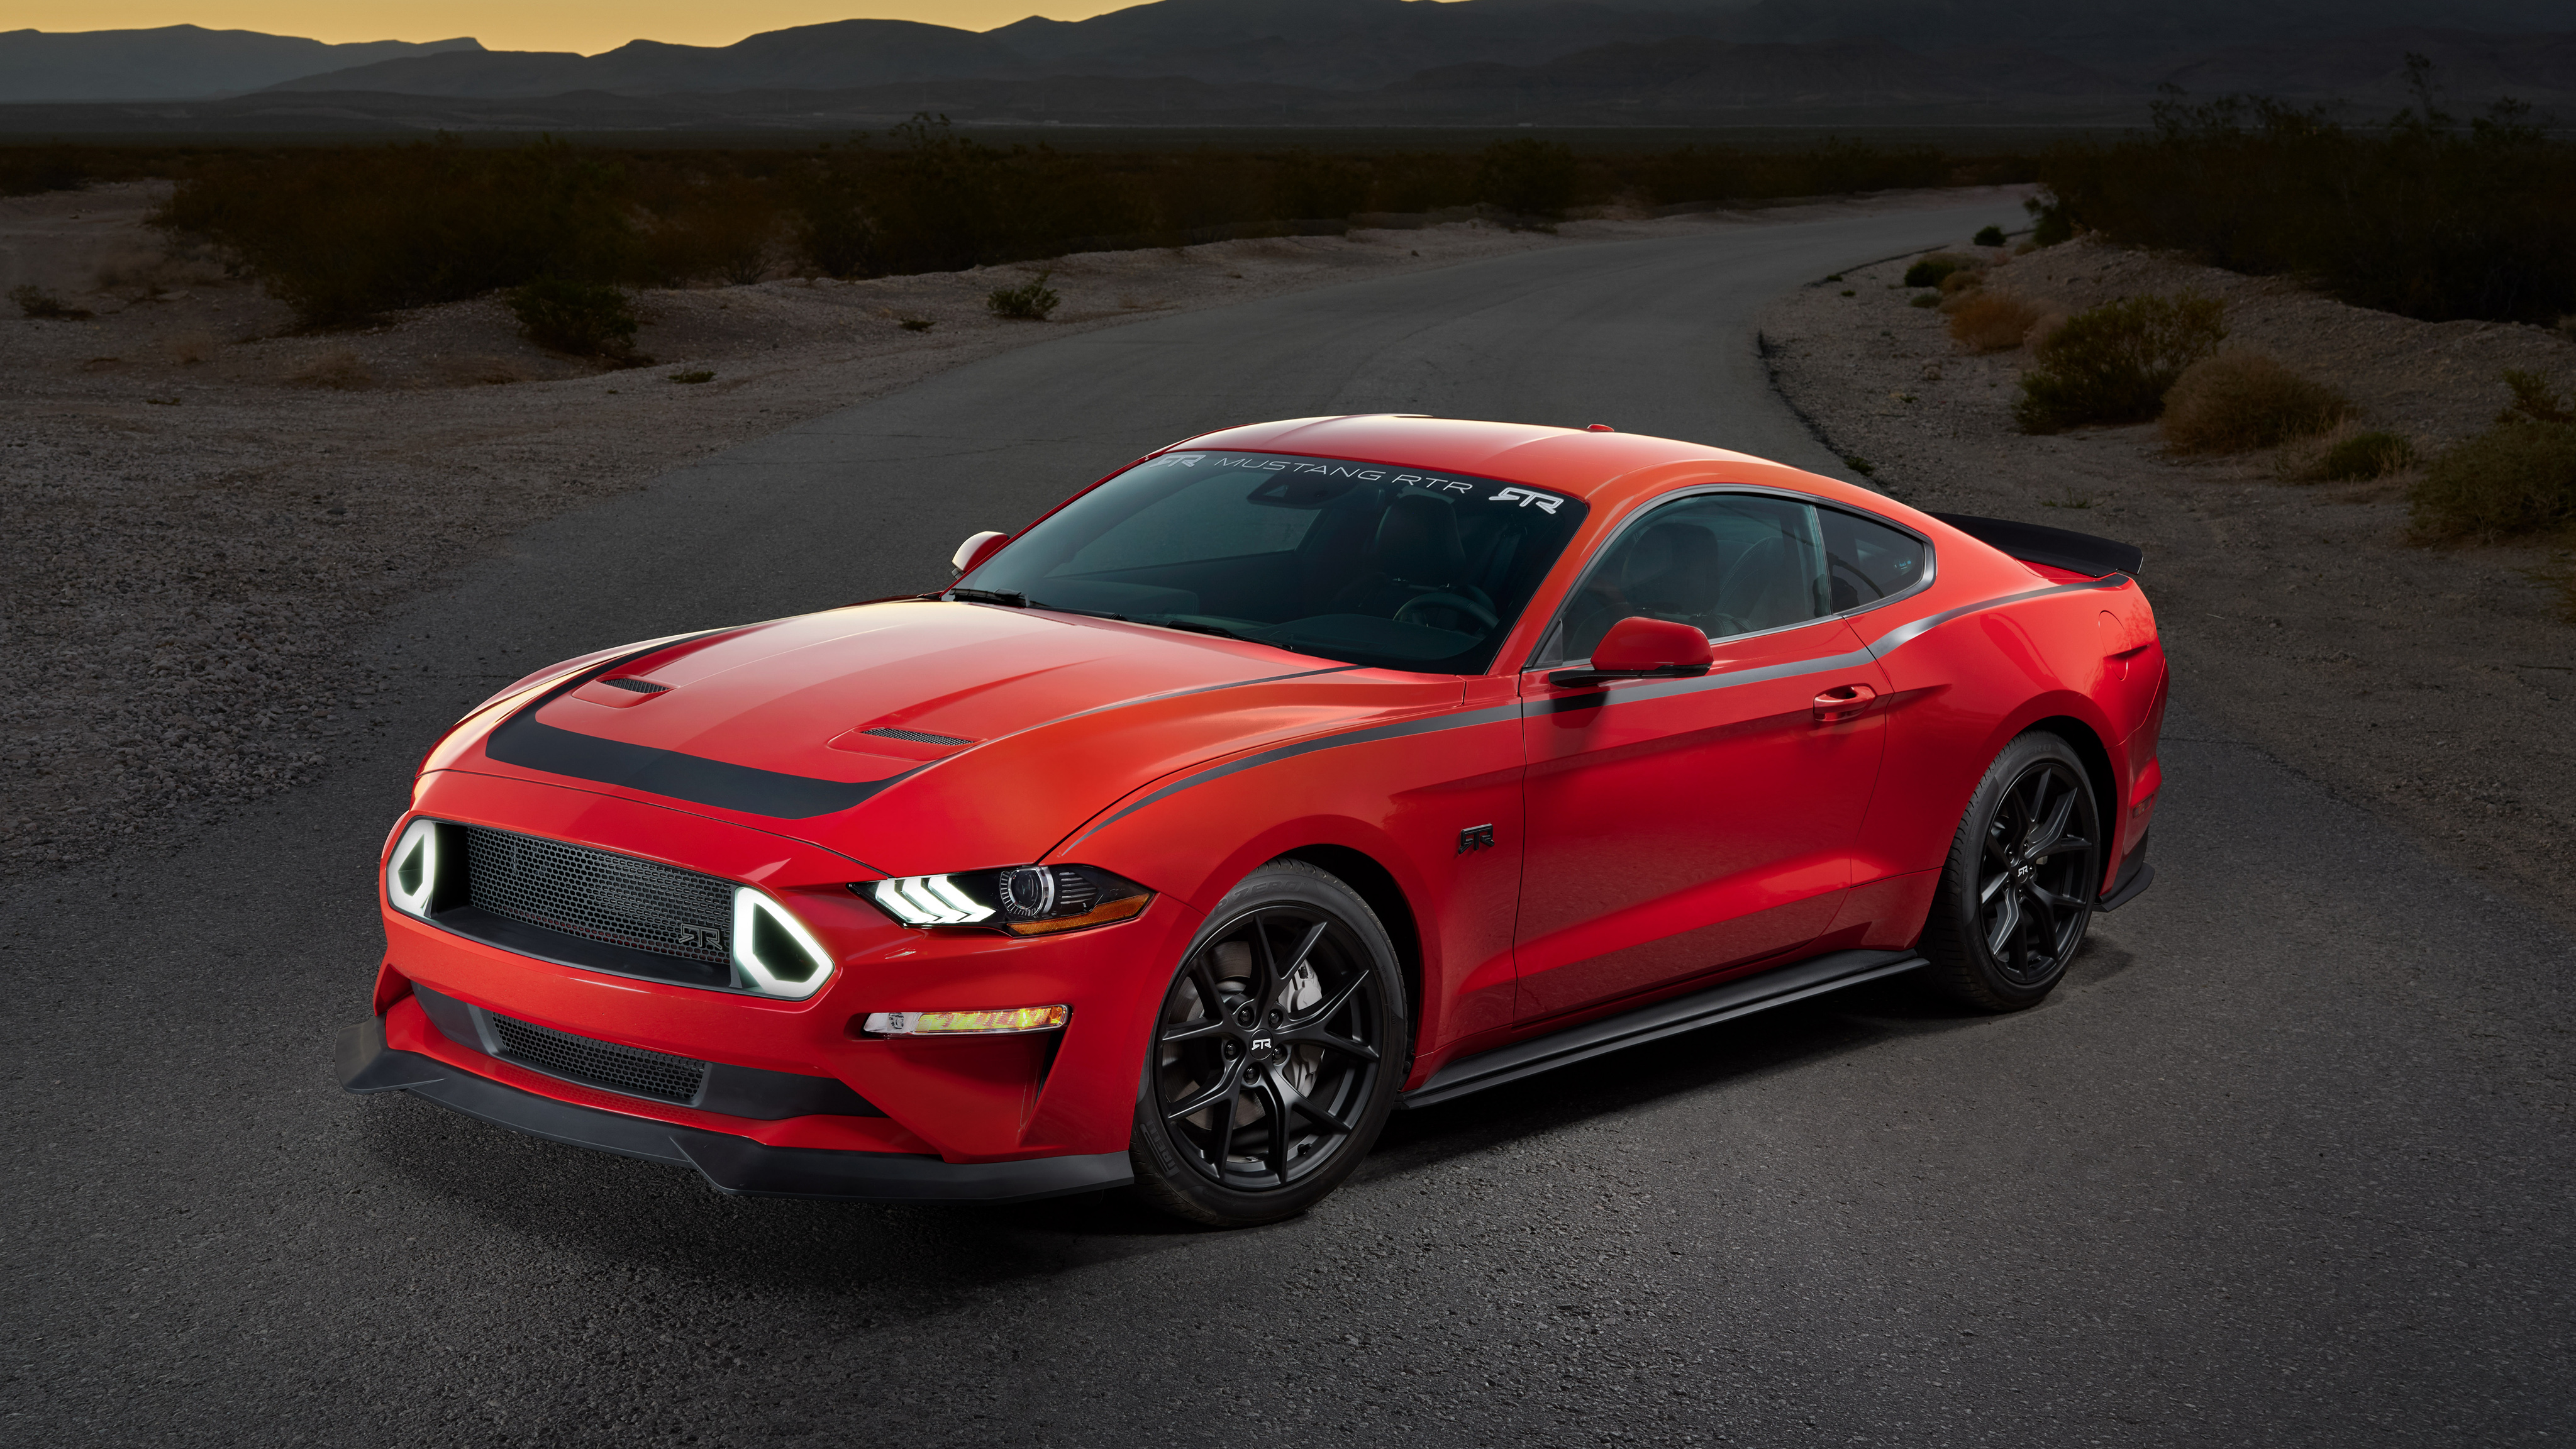 Ford Mustang RTR Car Vehicle Muscle Car Road Desert Red Cars 4096x2304